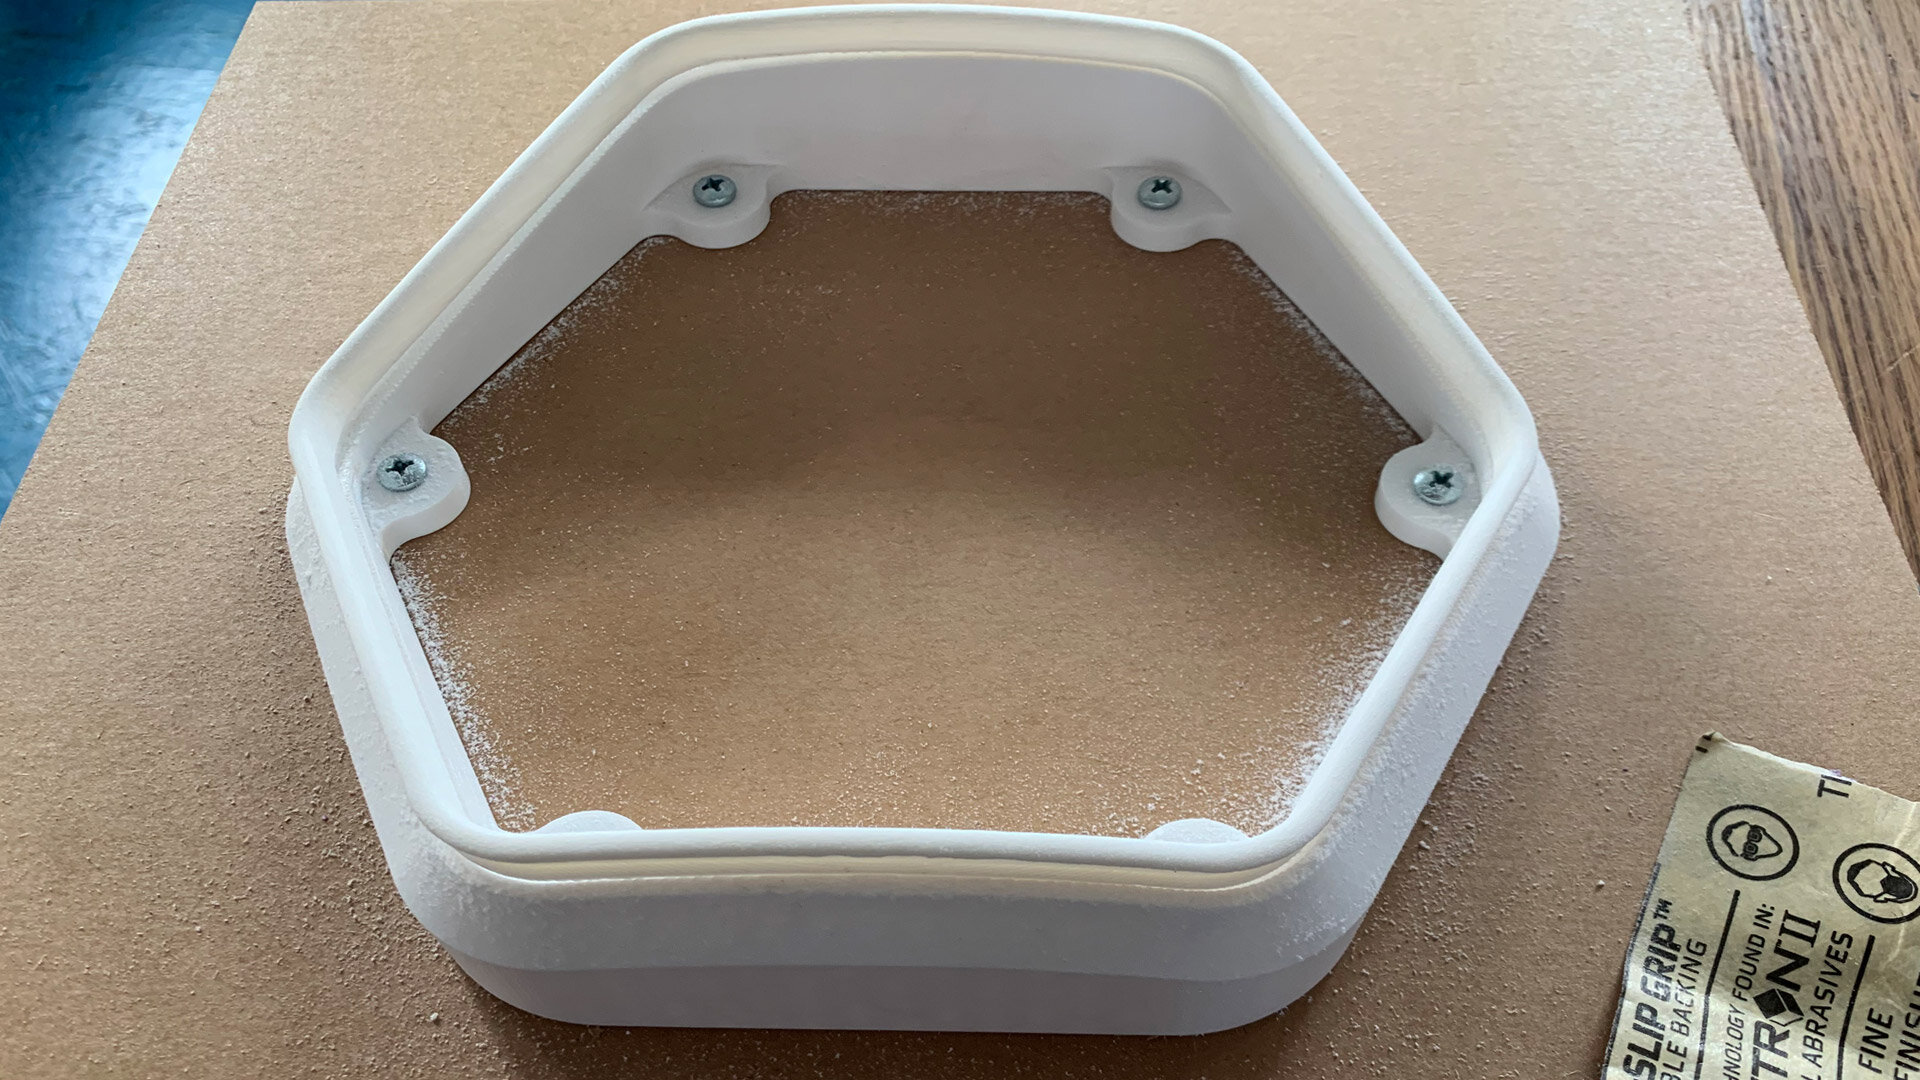  After printing, every door frame was snapped into a holding jig for a final sanding pass. The secret truth of 3D printed parts is that they usually require human clean up to make them look great. We will definitely be exploring injection molding for